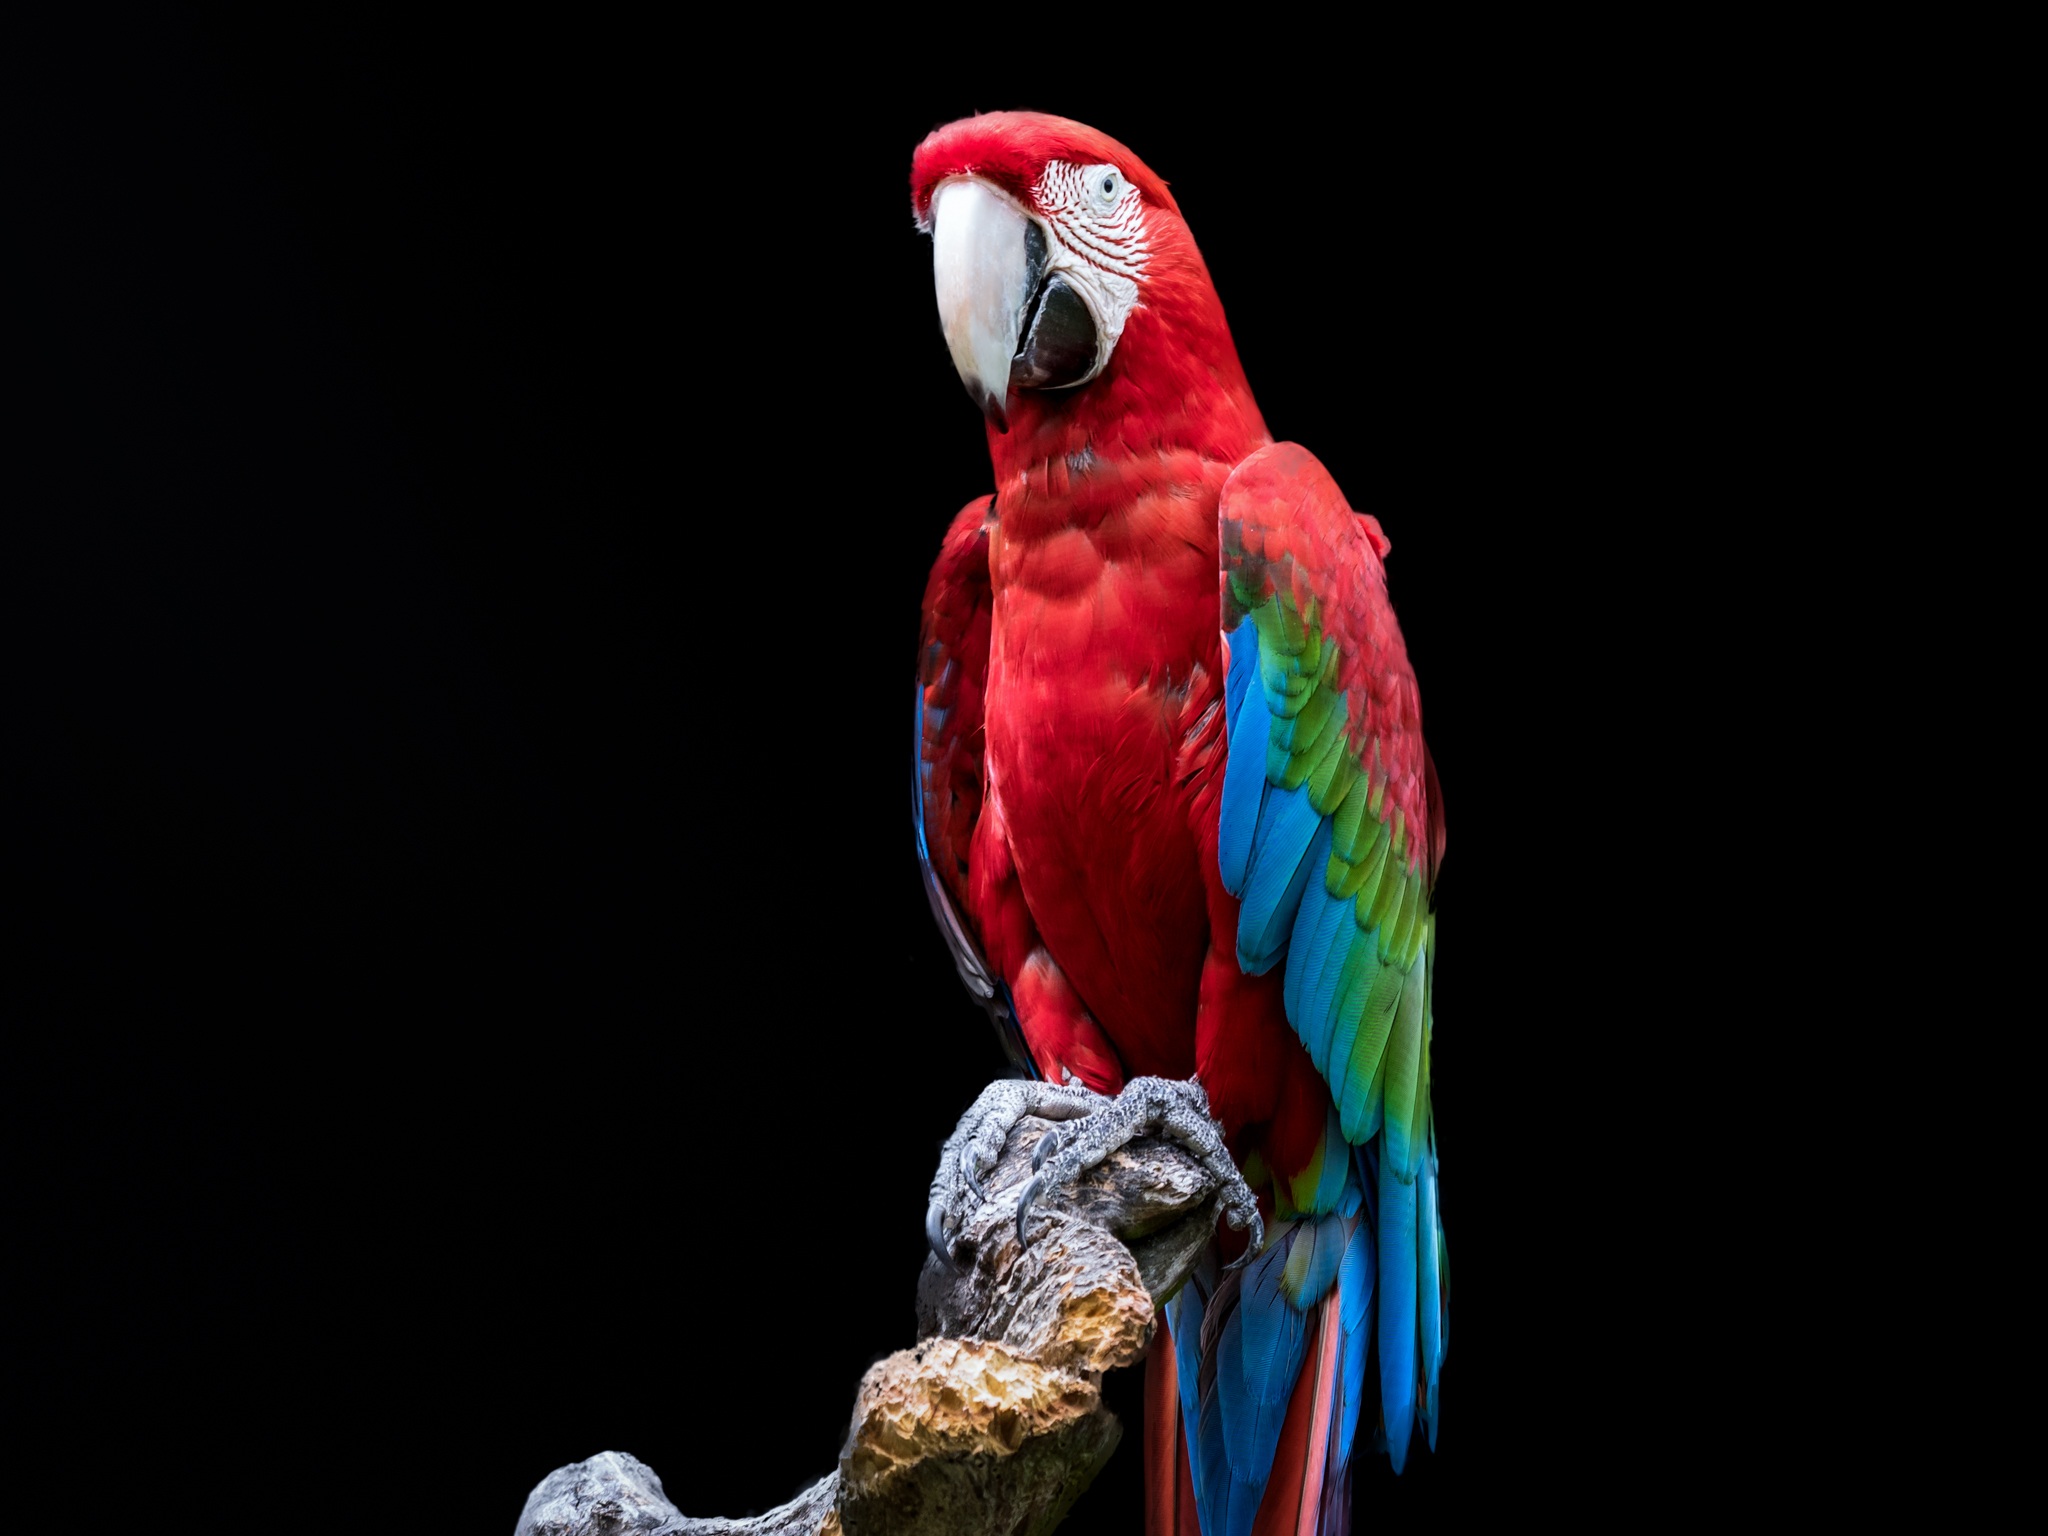 Bird Macaw Parrot Portrait Red And Green Macaw 2048x1536